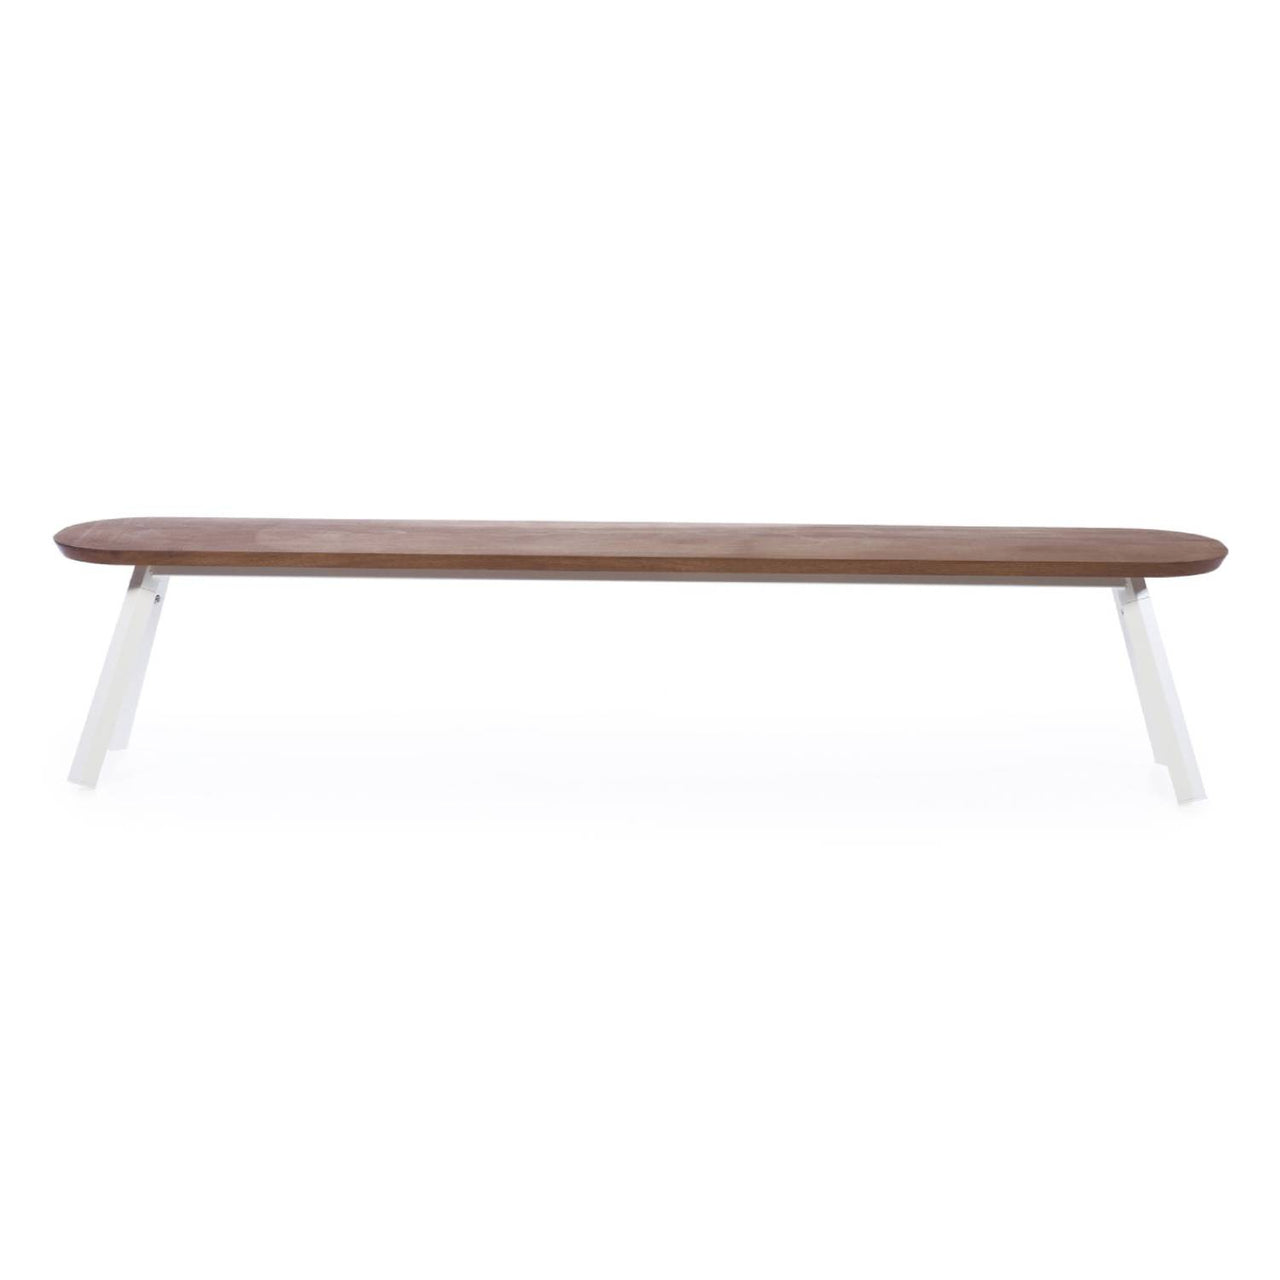 You and Me Bench: Indoor/Outdoor + Extra Large - 112.2